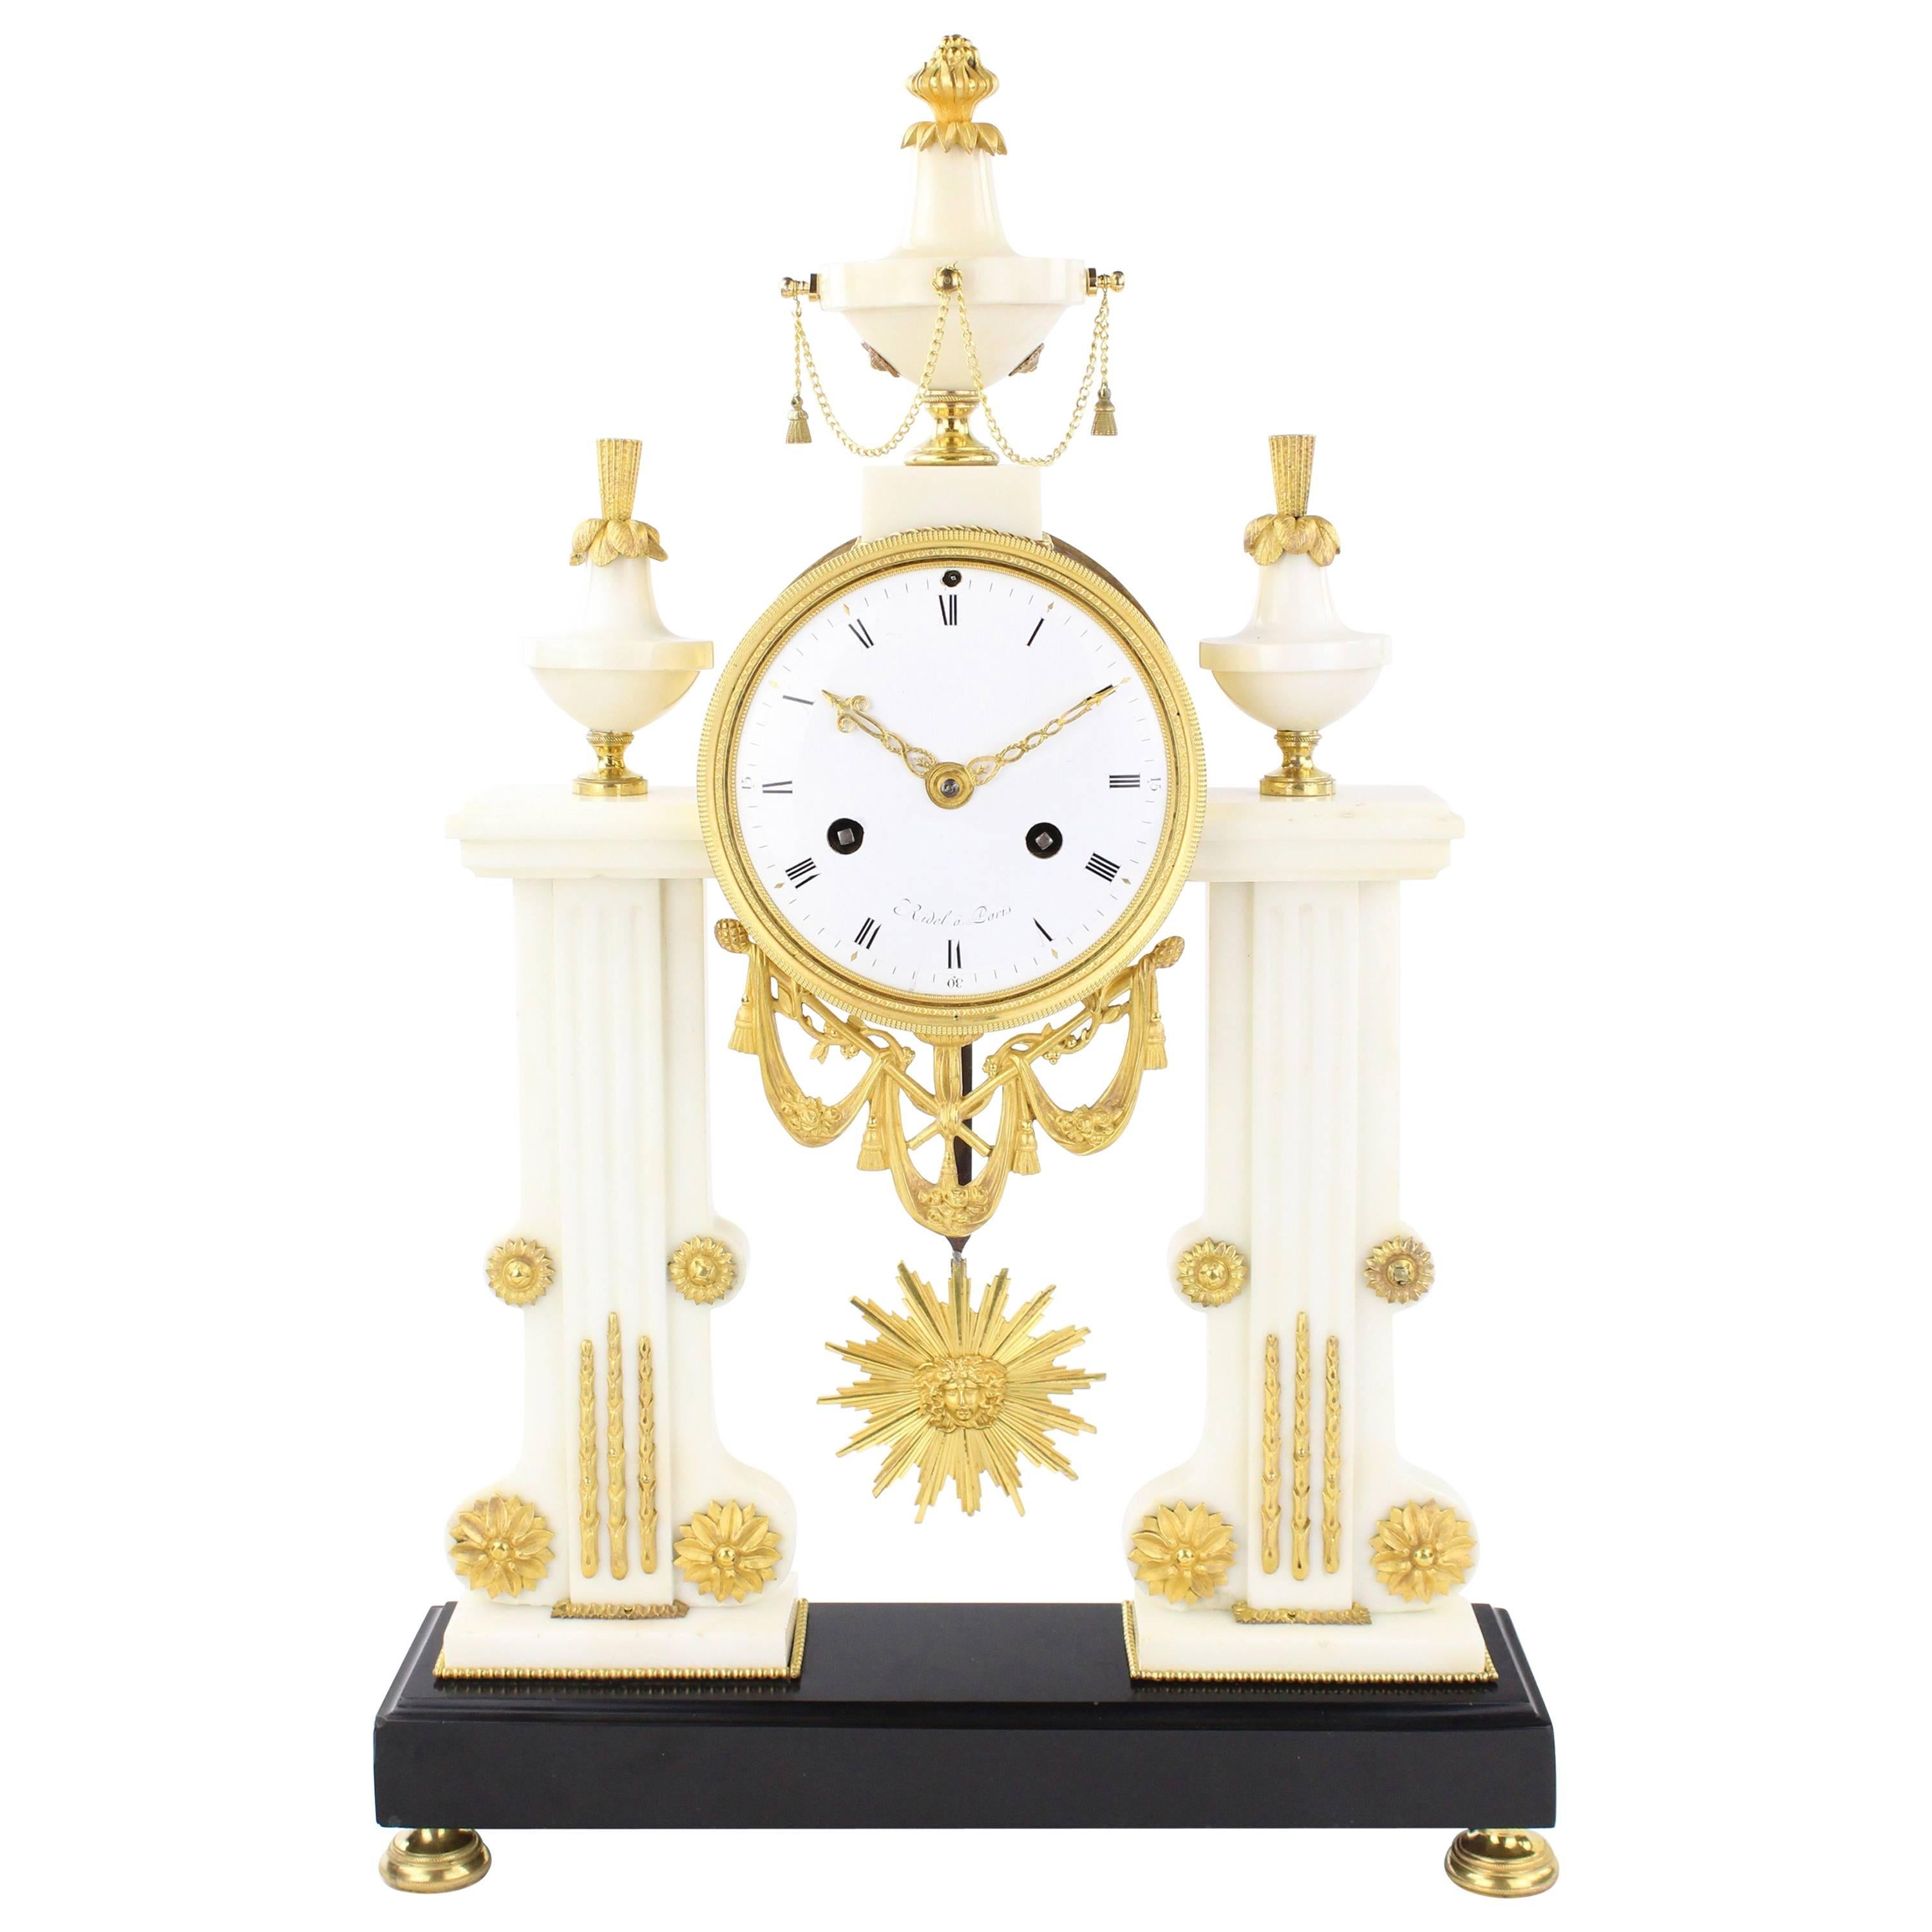 Rare and Decorative Early 19th Century Table Clock, France, circa 1810